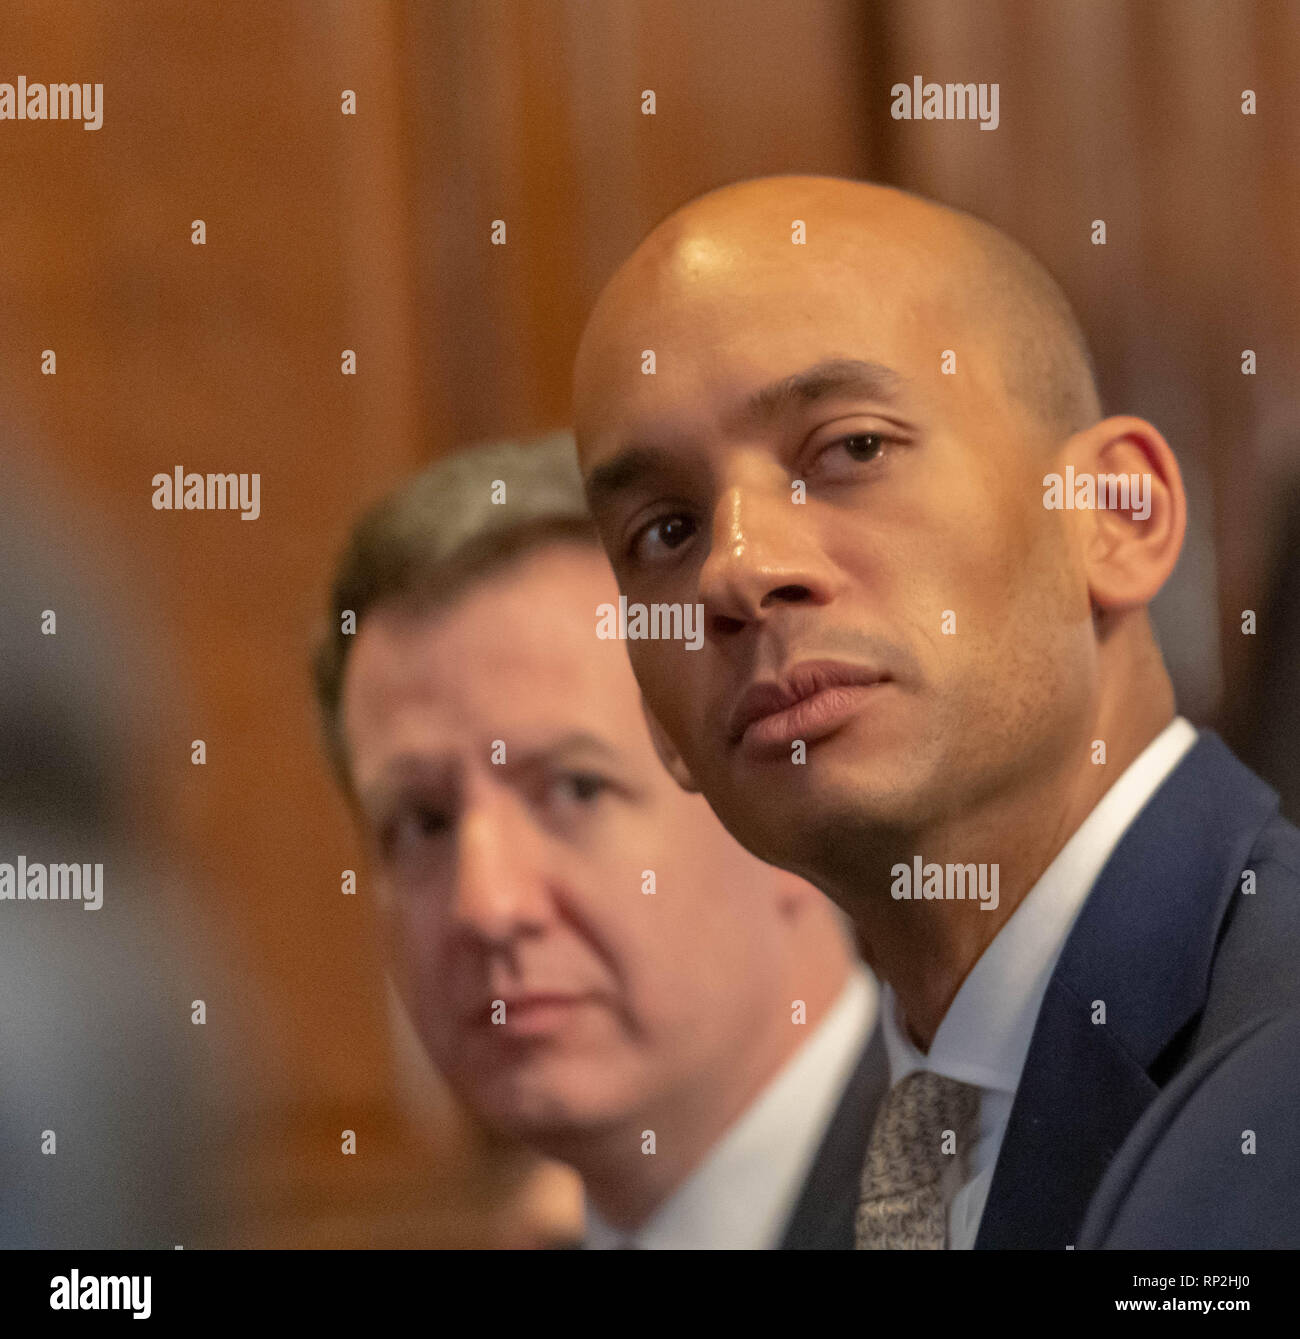 London, UK. 20th Feb 2019. Three Conservative MP's, Heidi Allen, Sarah Wollaston, and Anna Soulbry who resigned from the Conservative Party, give a press conference in Westminster London Chuka Umunna Credit: Ian Davidson/Alamy Live News Stock Photo